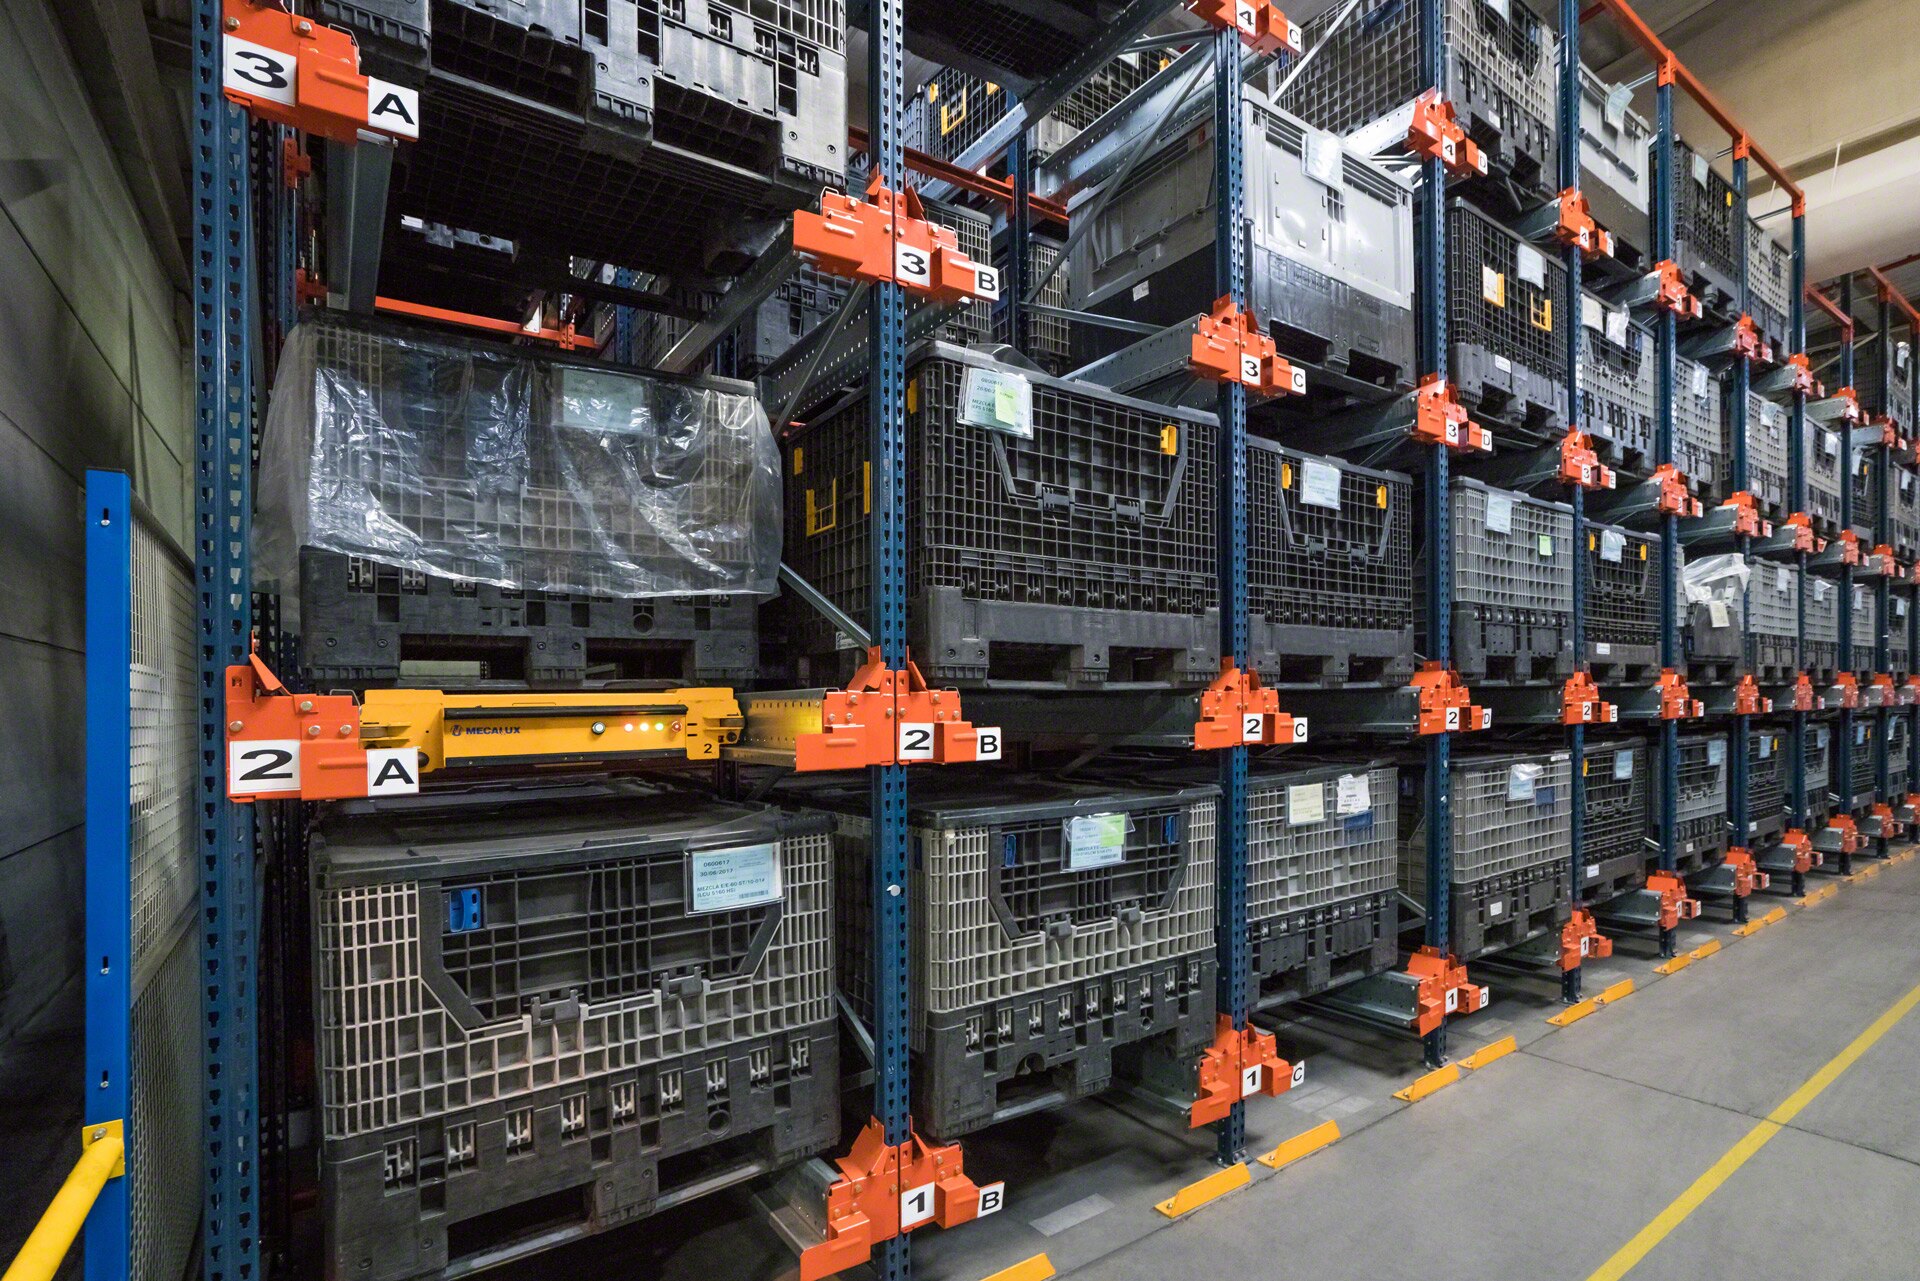 Our Pallet Shuttle can also operate with different types of pallets like plastic containers